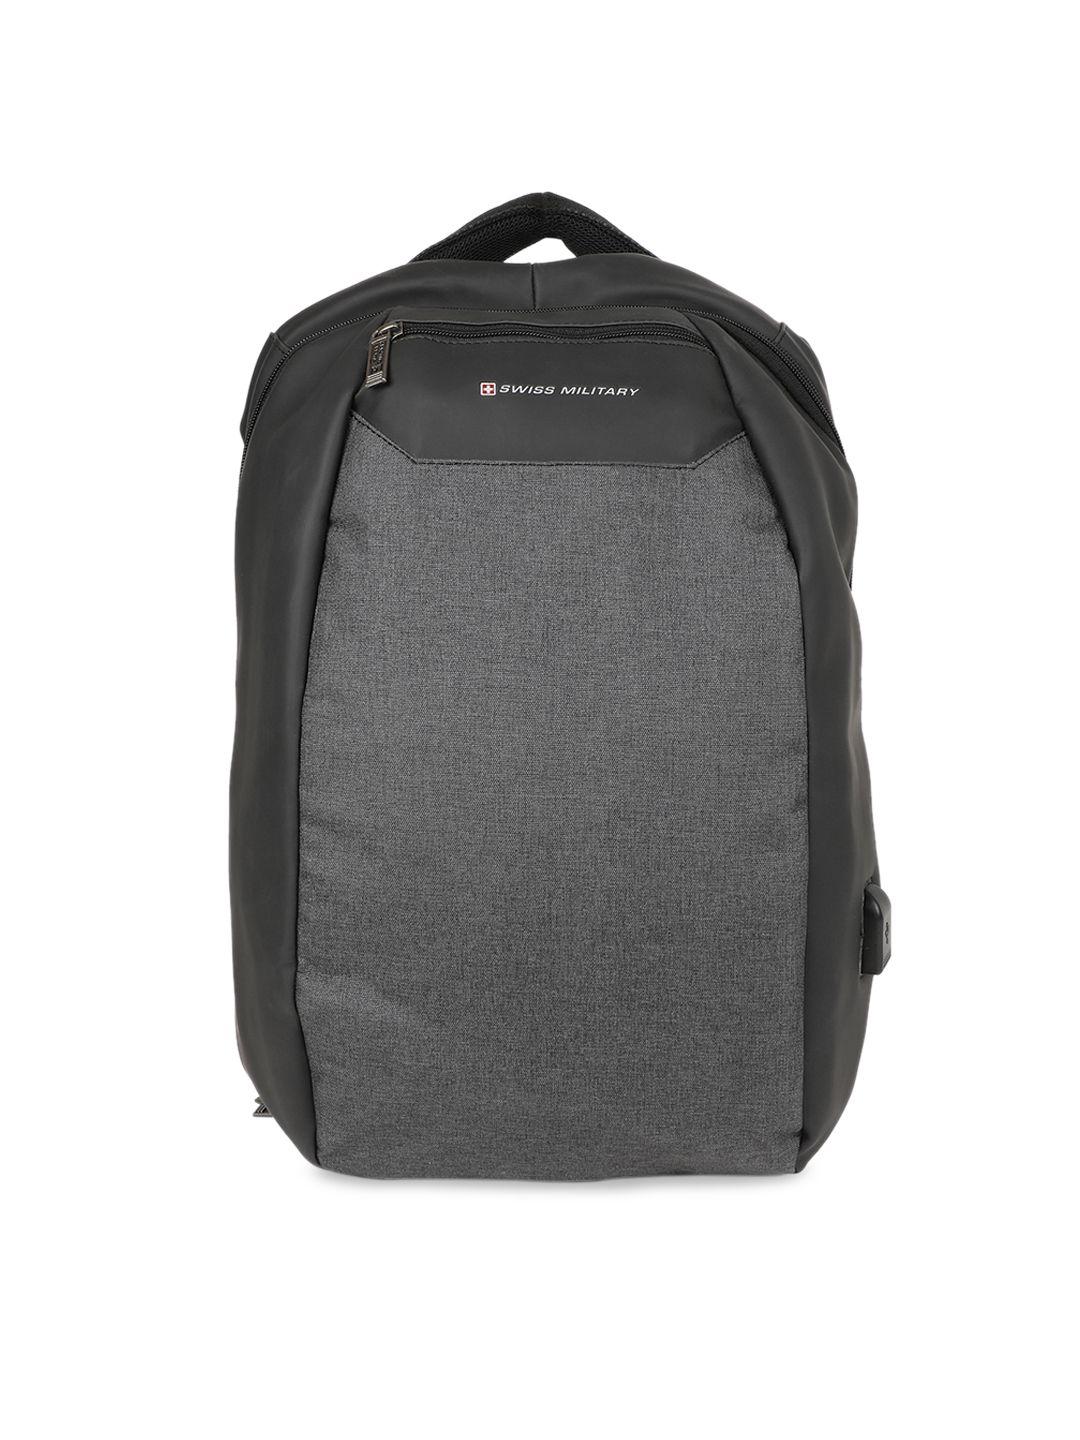 swiss military unisex black & grey solid backpack